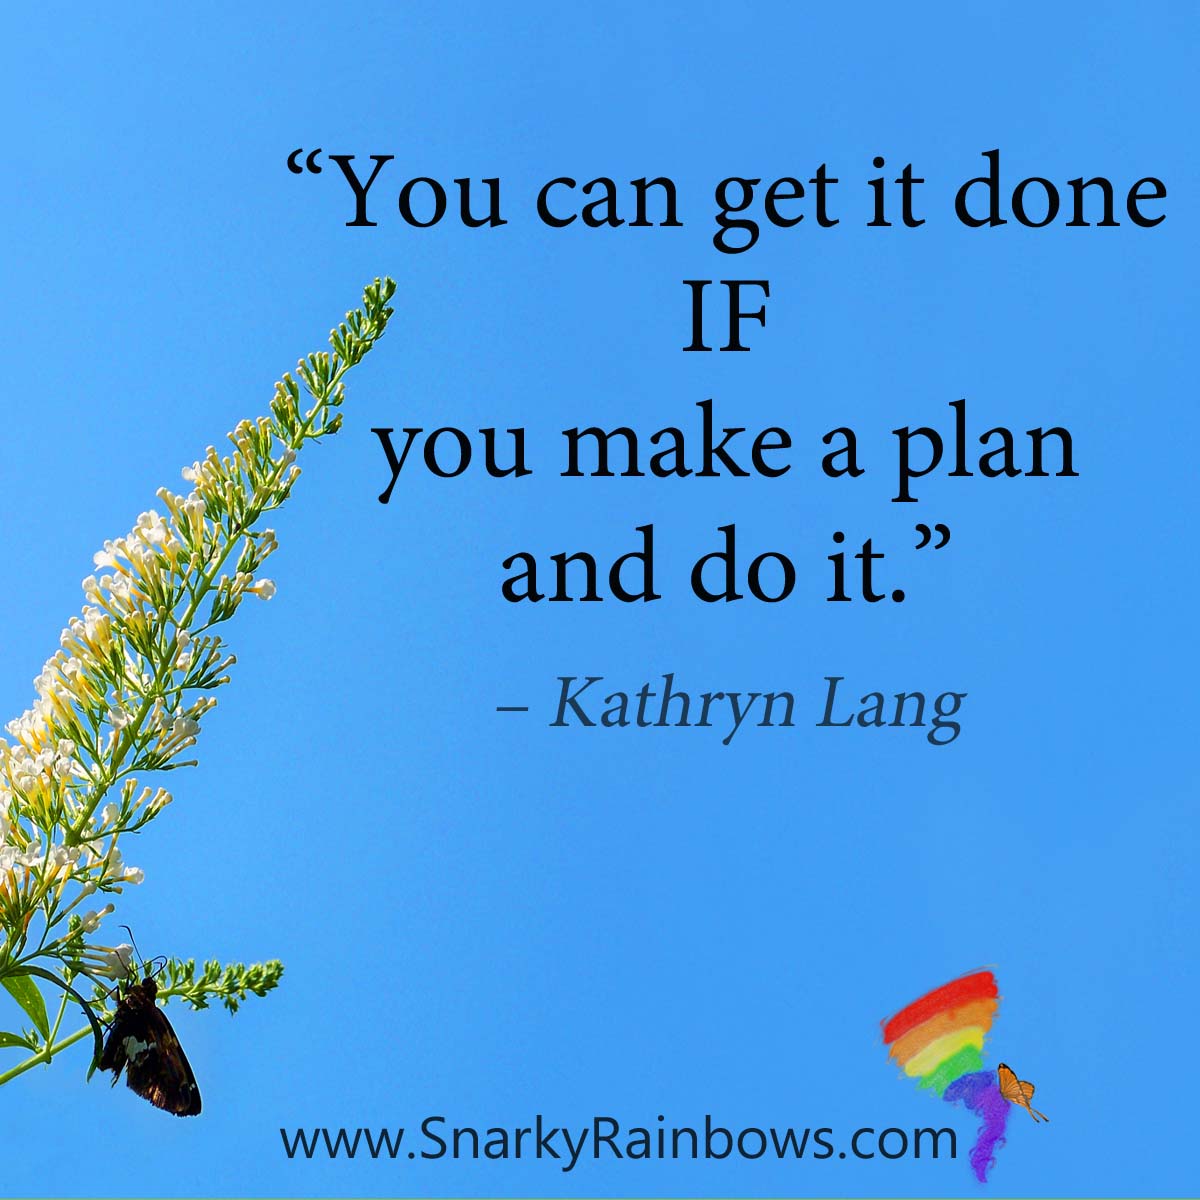 #QuoteoftheDay - you can get it done